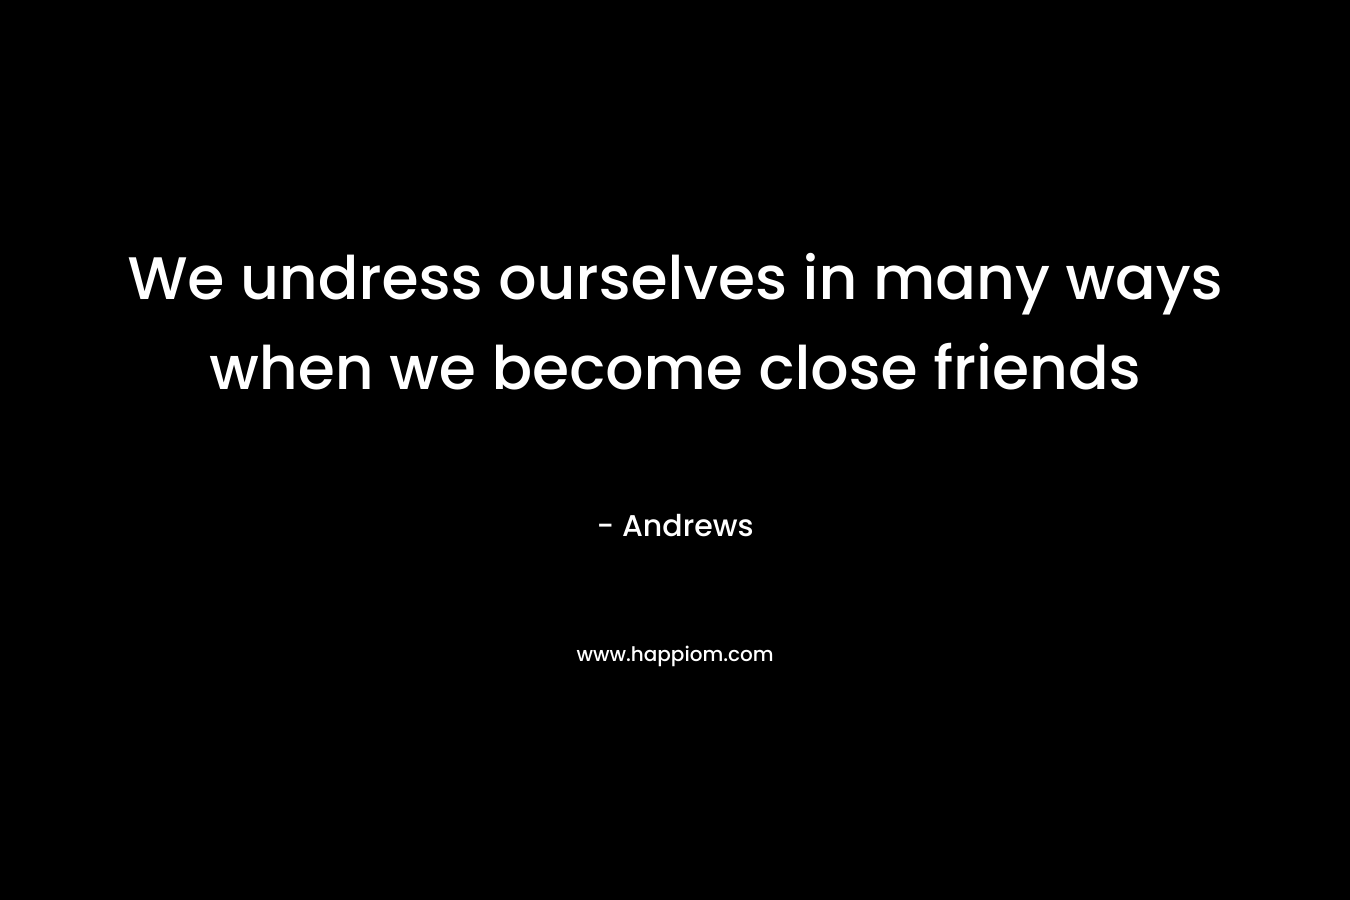 We undress ourselves in many ways when we become close friends